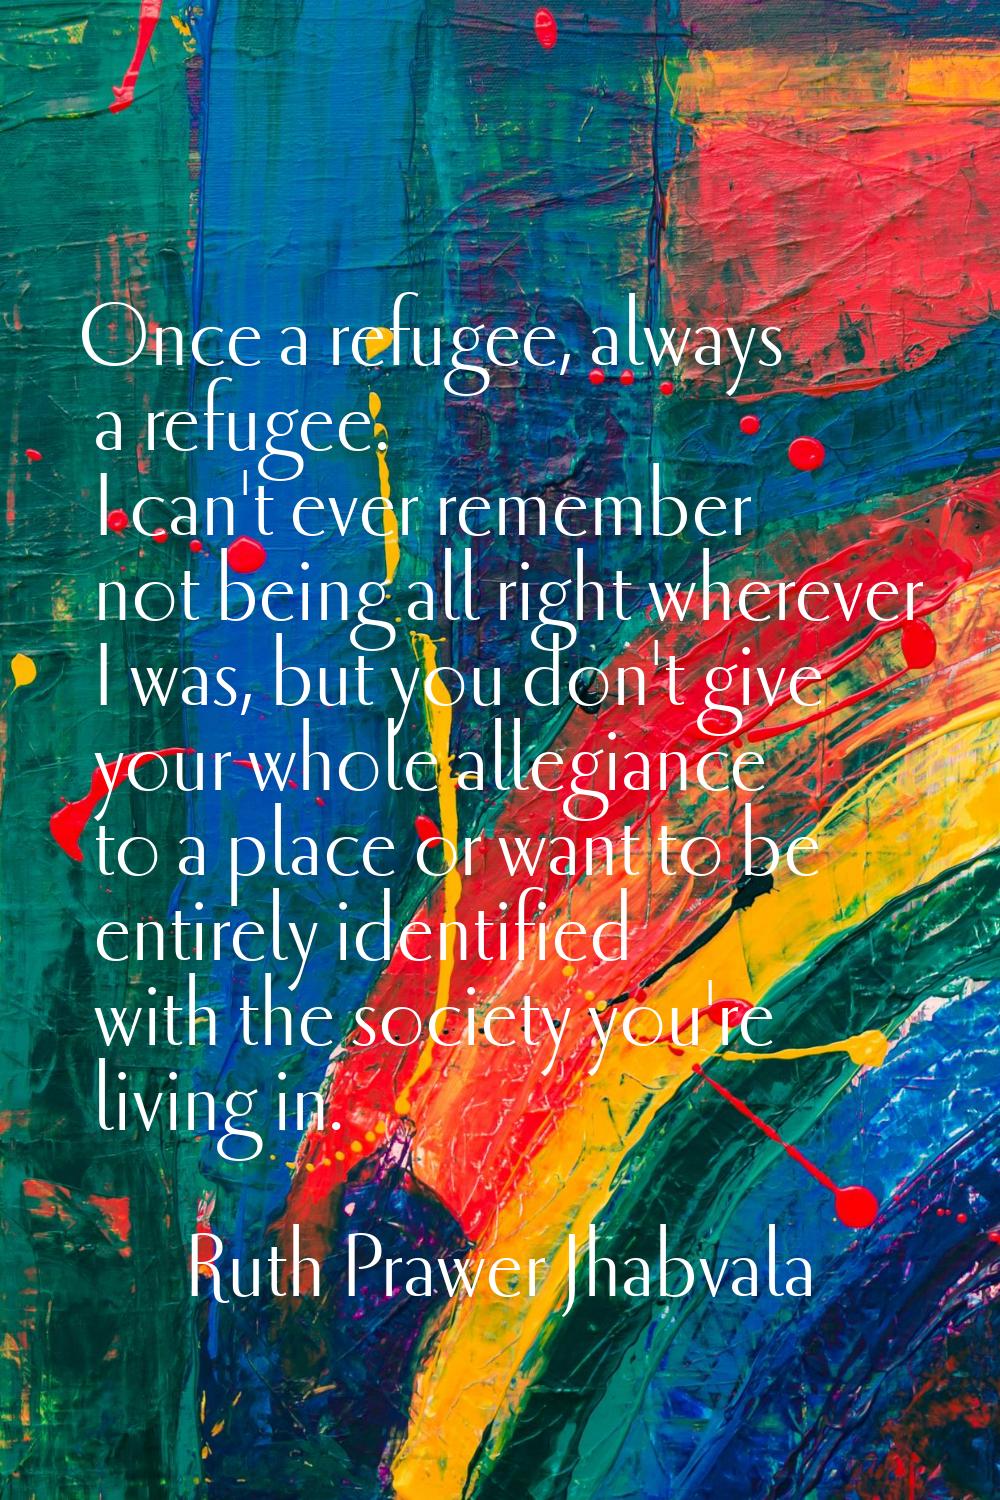 Once a refugee, always a refugee. I can't ever remember not being all right wherever I was, but you